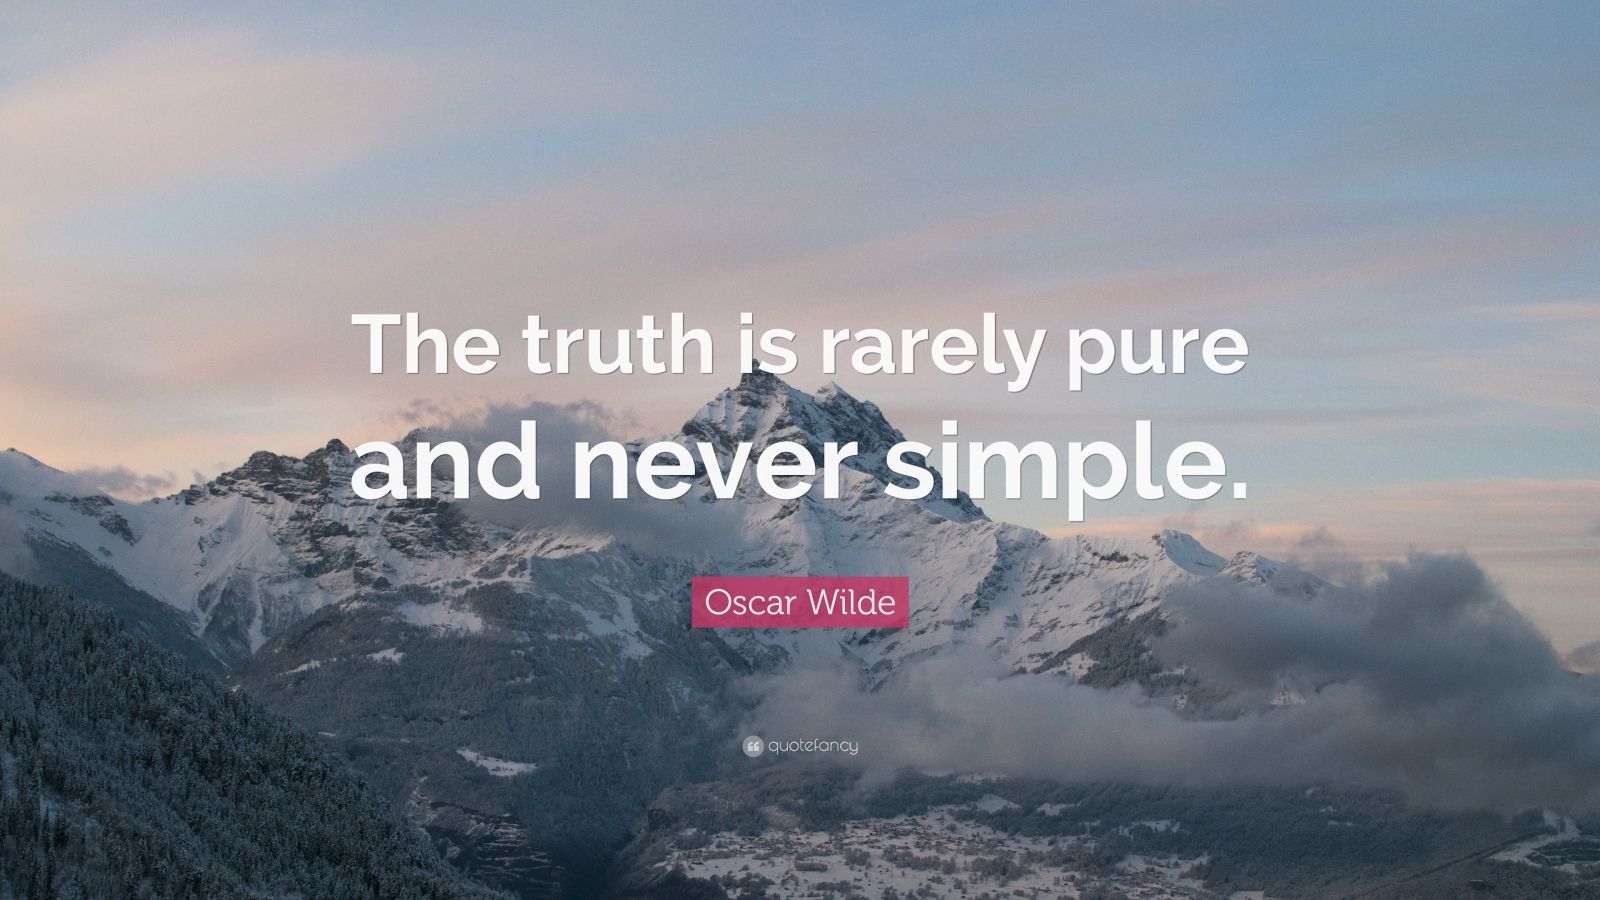 Oscar Wilde Quote: "The truth is rarely pure and never ...